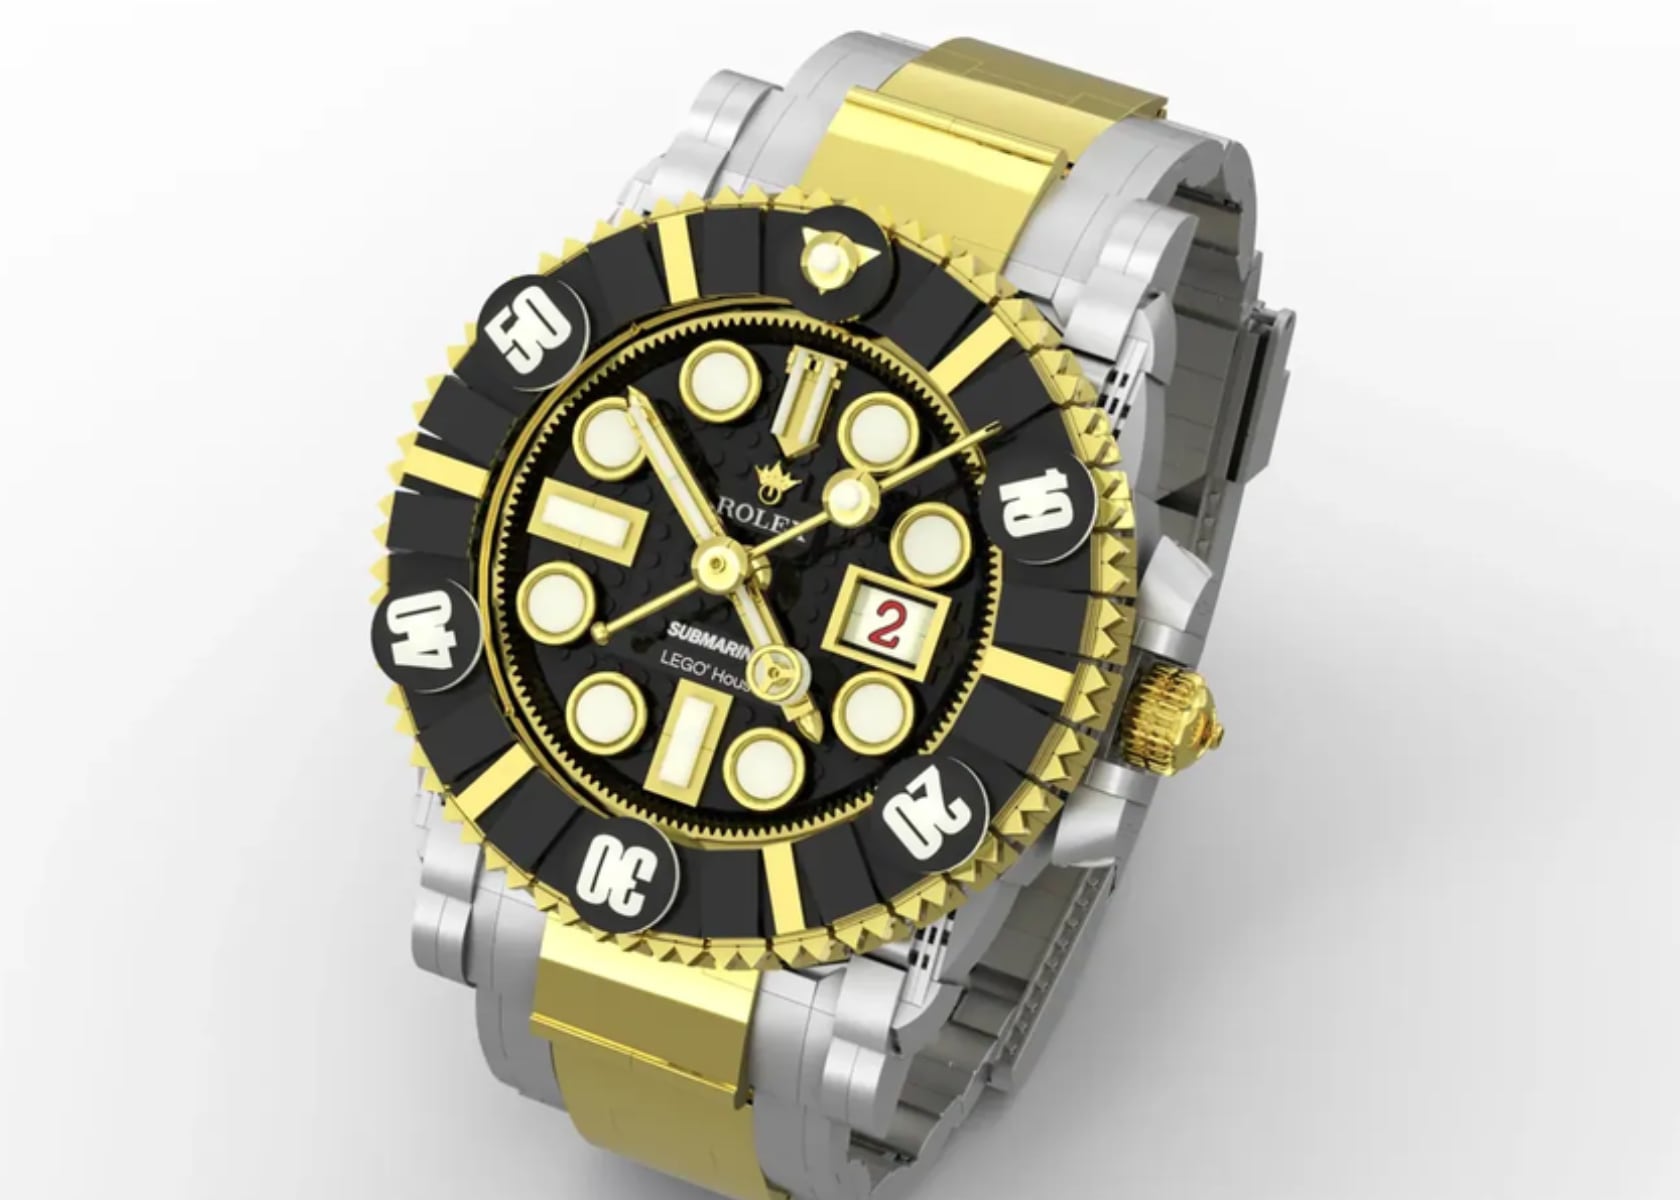 #This LEGO Rolex Submariner Is A Masterpiece for Luxury Watch and LEGO Fans